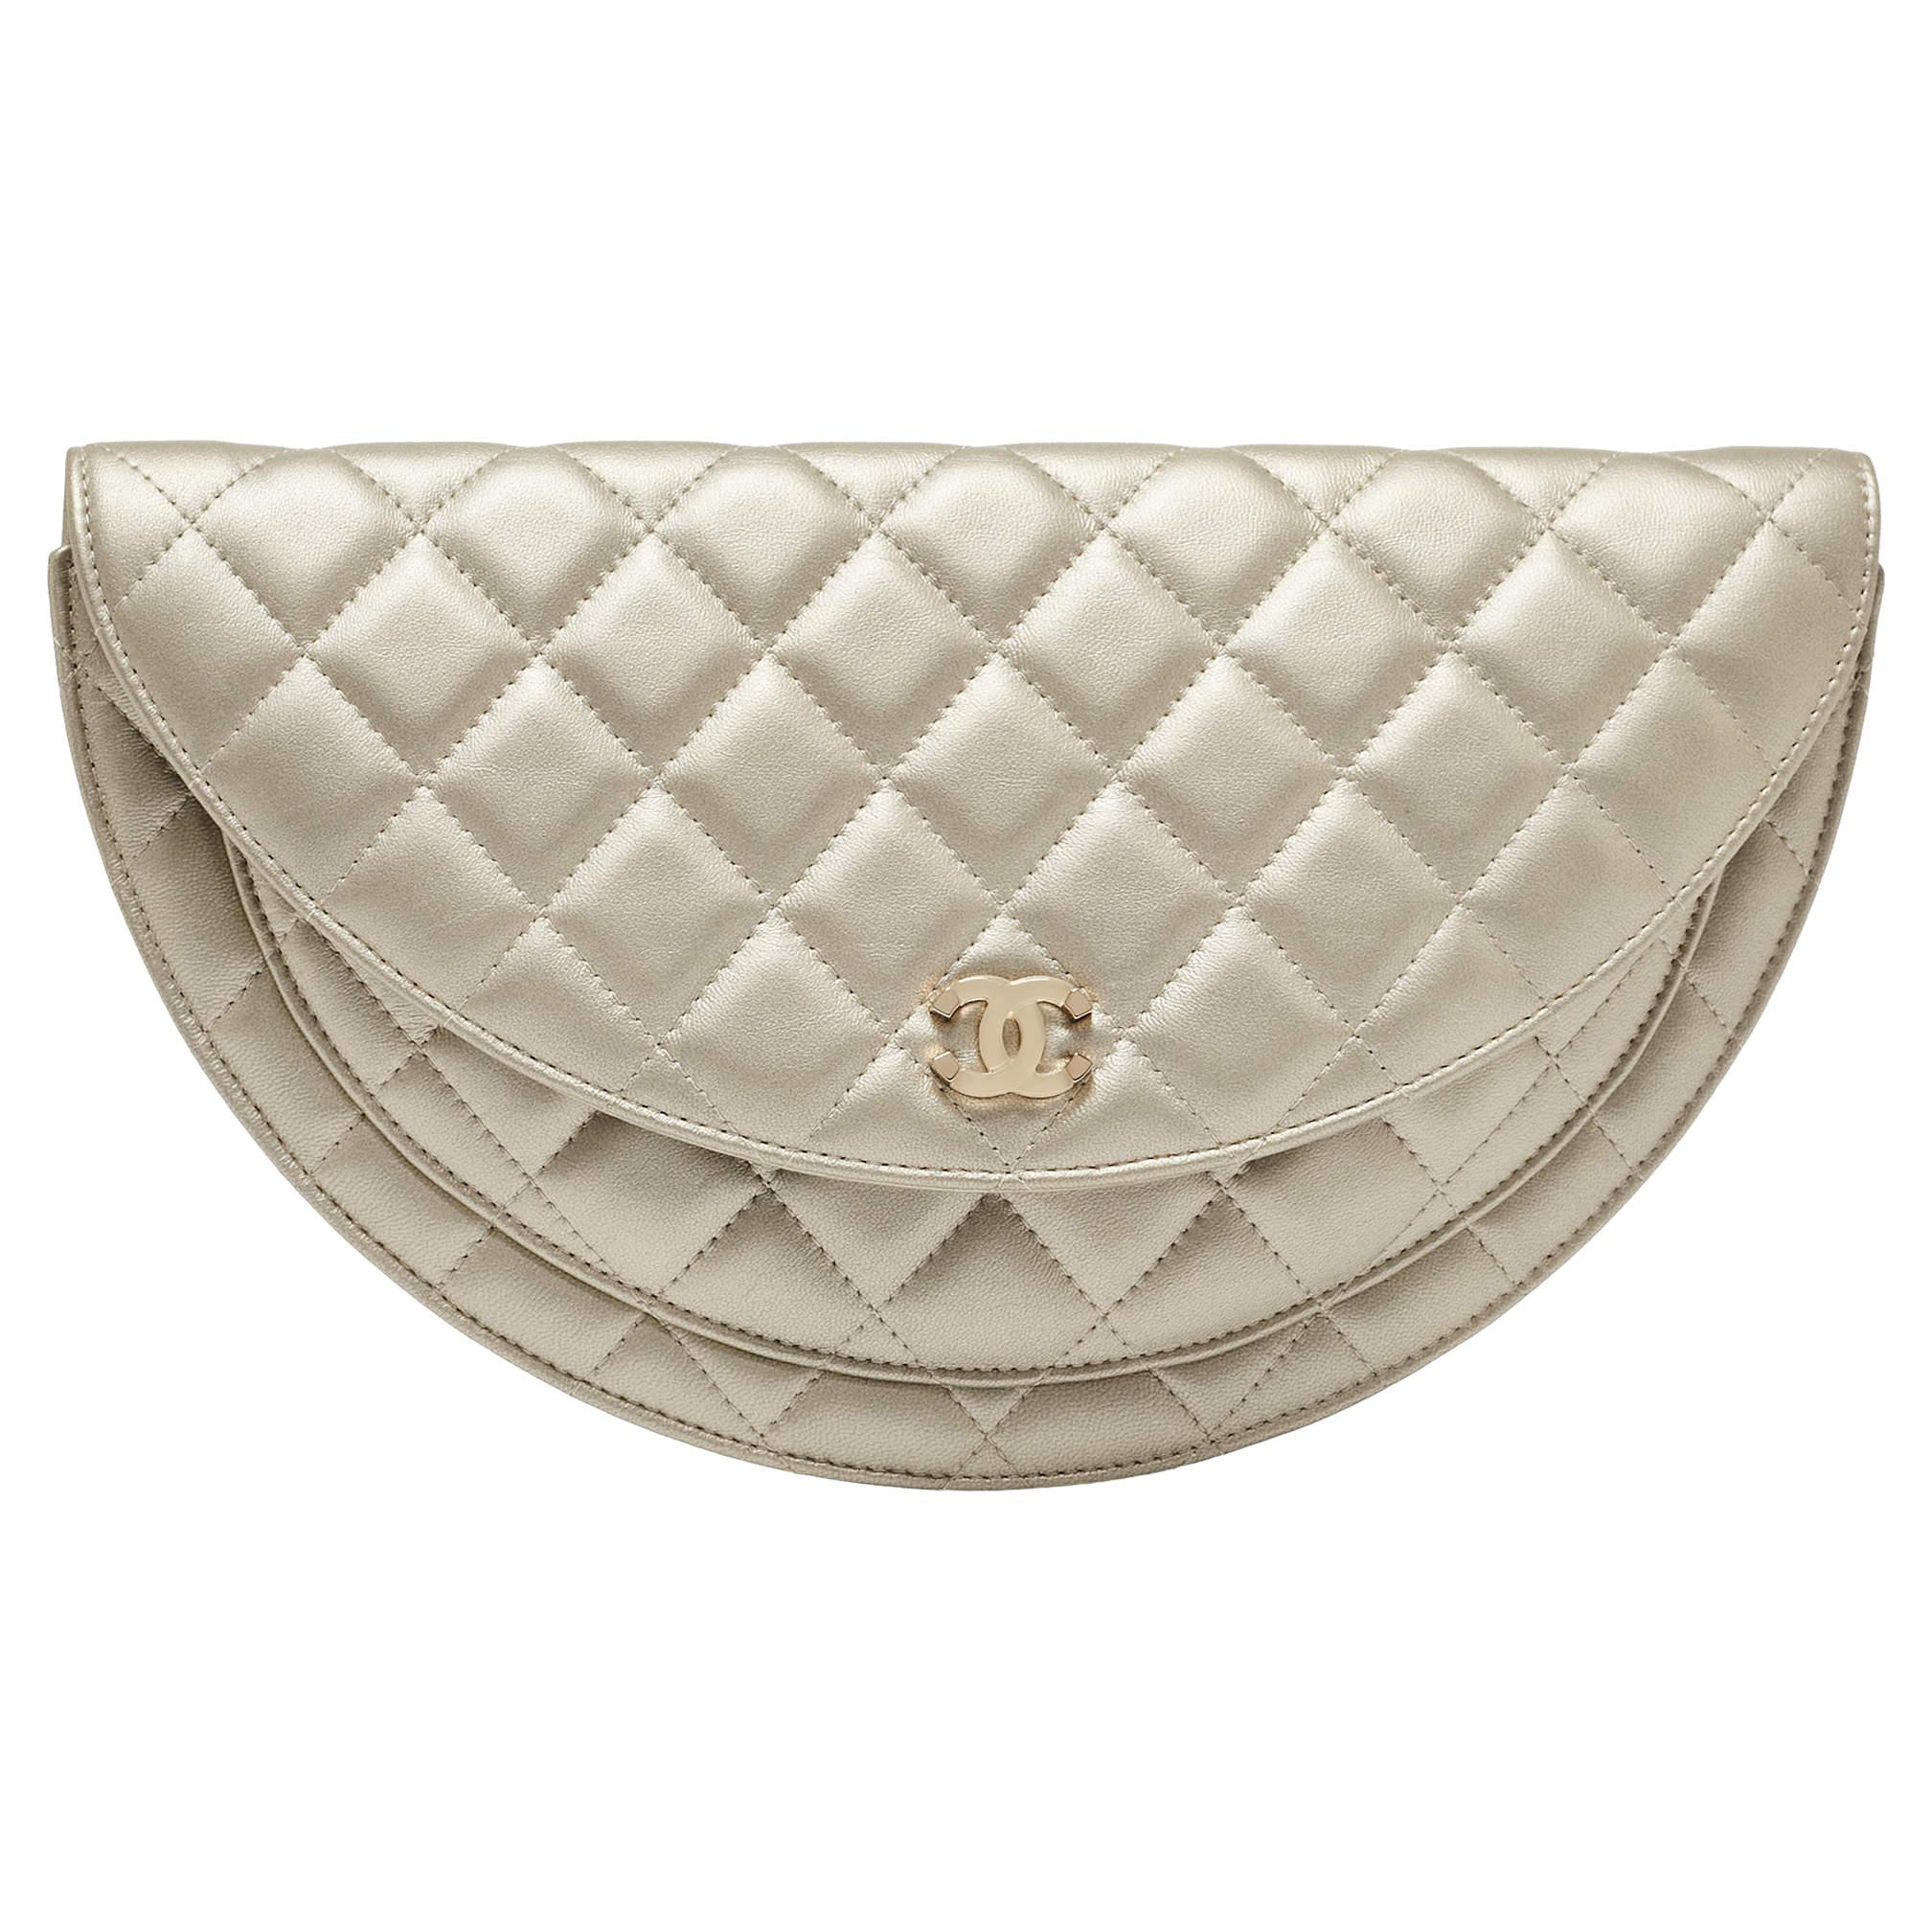 Chanel Metallic Light Gold Quilted Leather Flap Clutch